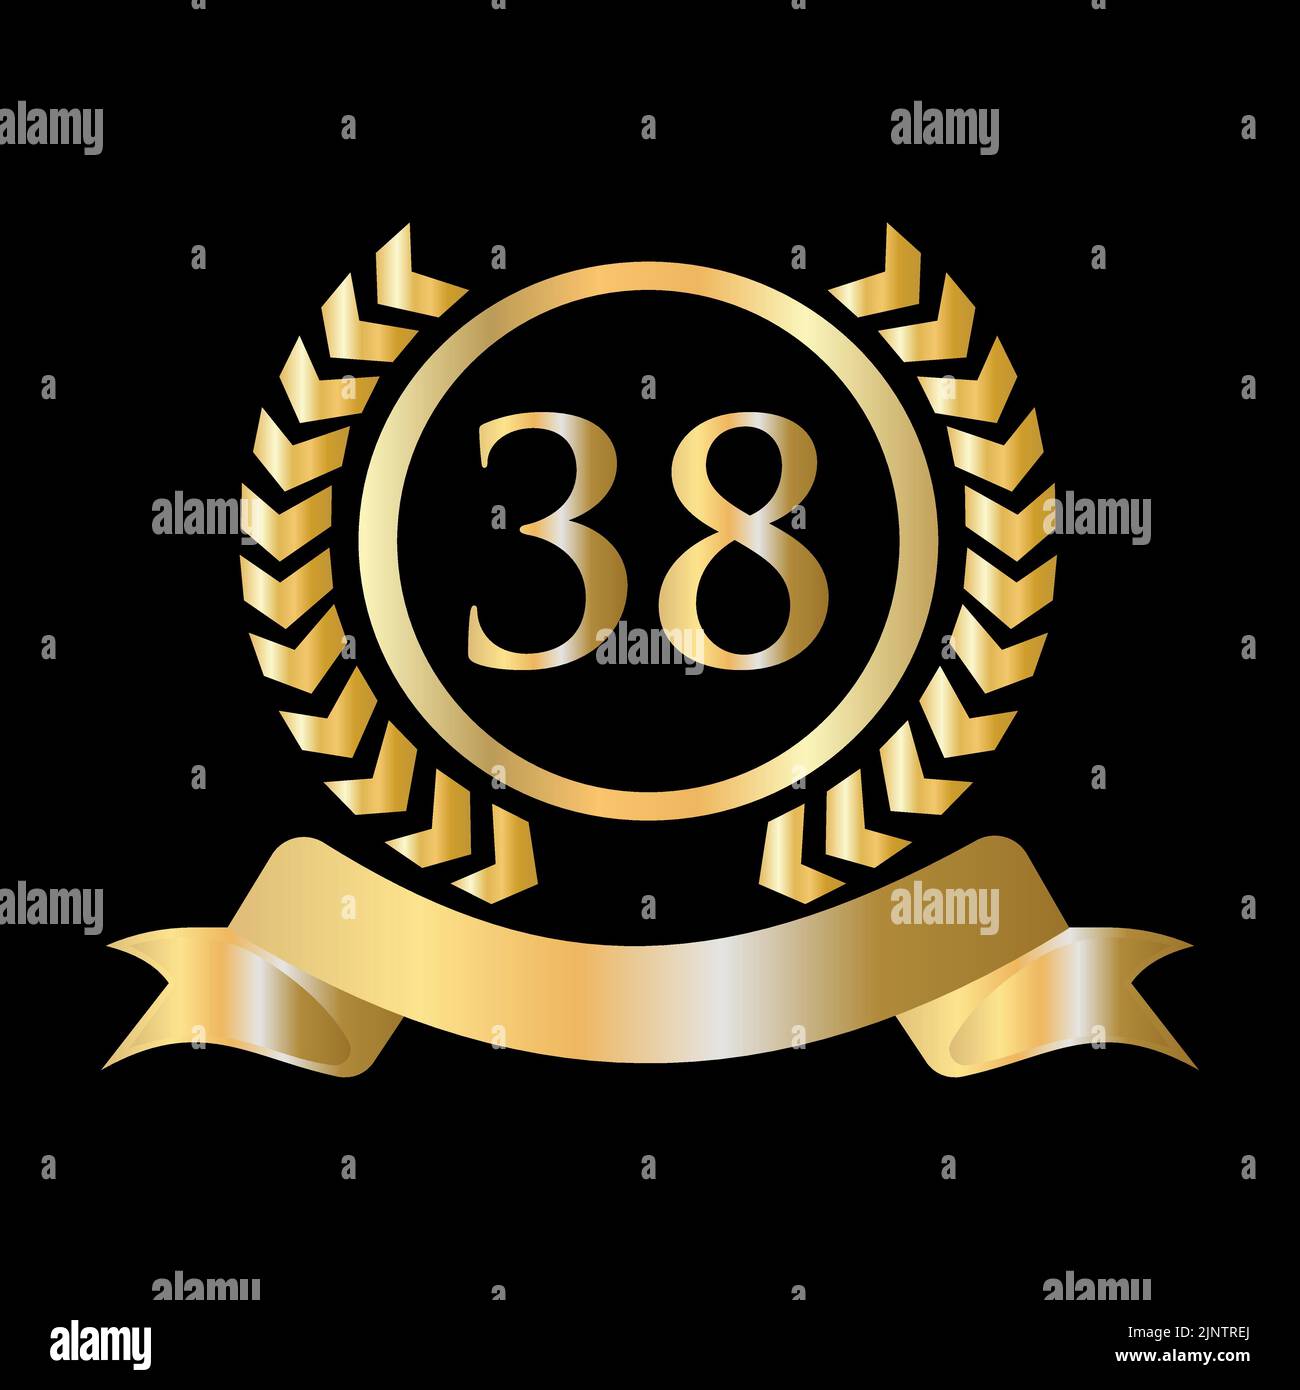 38th Anniversary Celebration Gold and Black Template. Luxury Style Gold Heraldic Crest Logo Element Vintage Laurel Vector Stock Vector